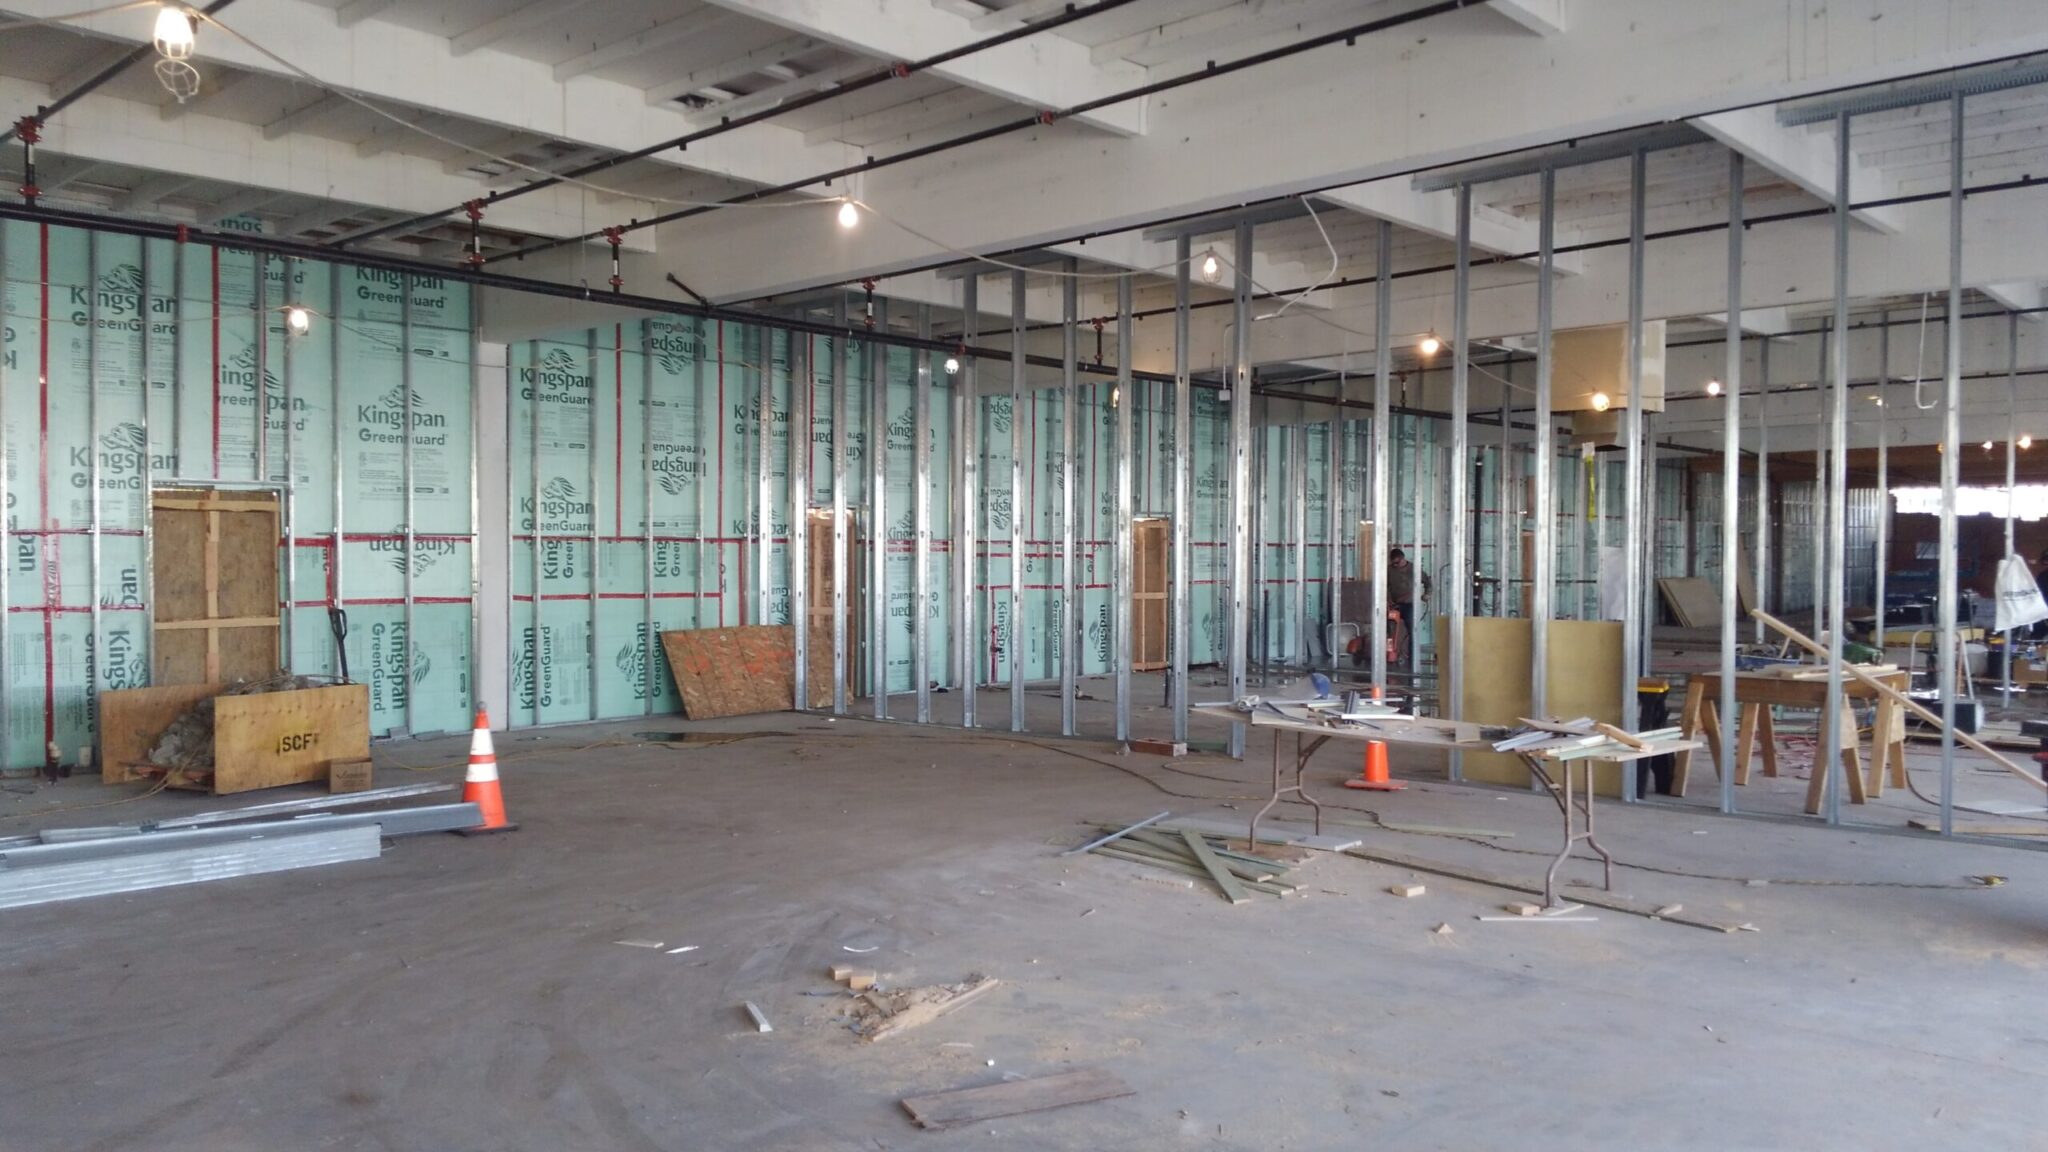 2101.5 - Interior Framing for Tenant Spaces - Valley Plaza Fire Rebuild